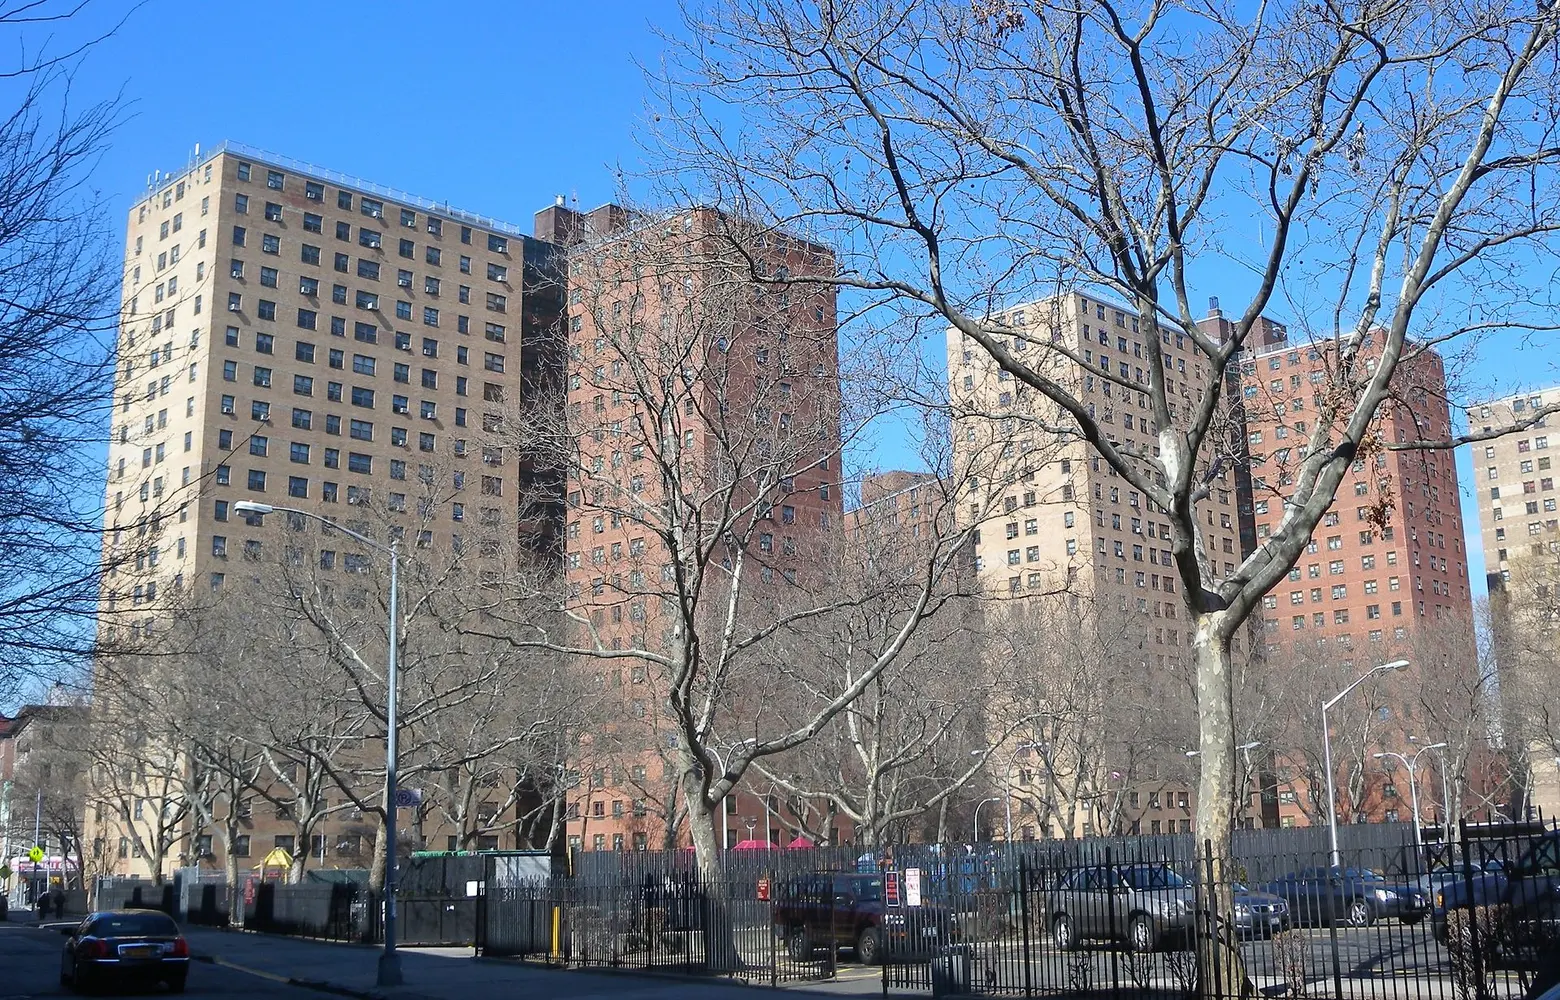 489 New Units of Affordable/Elderly Housing to Rise on Land in Brooklyn and the Bronx